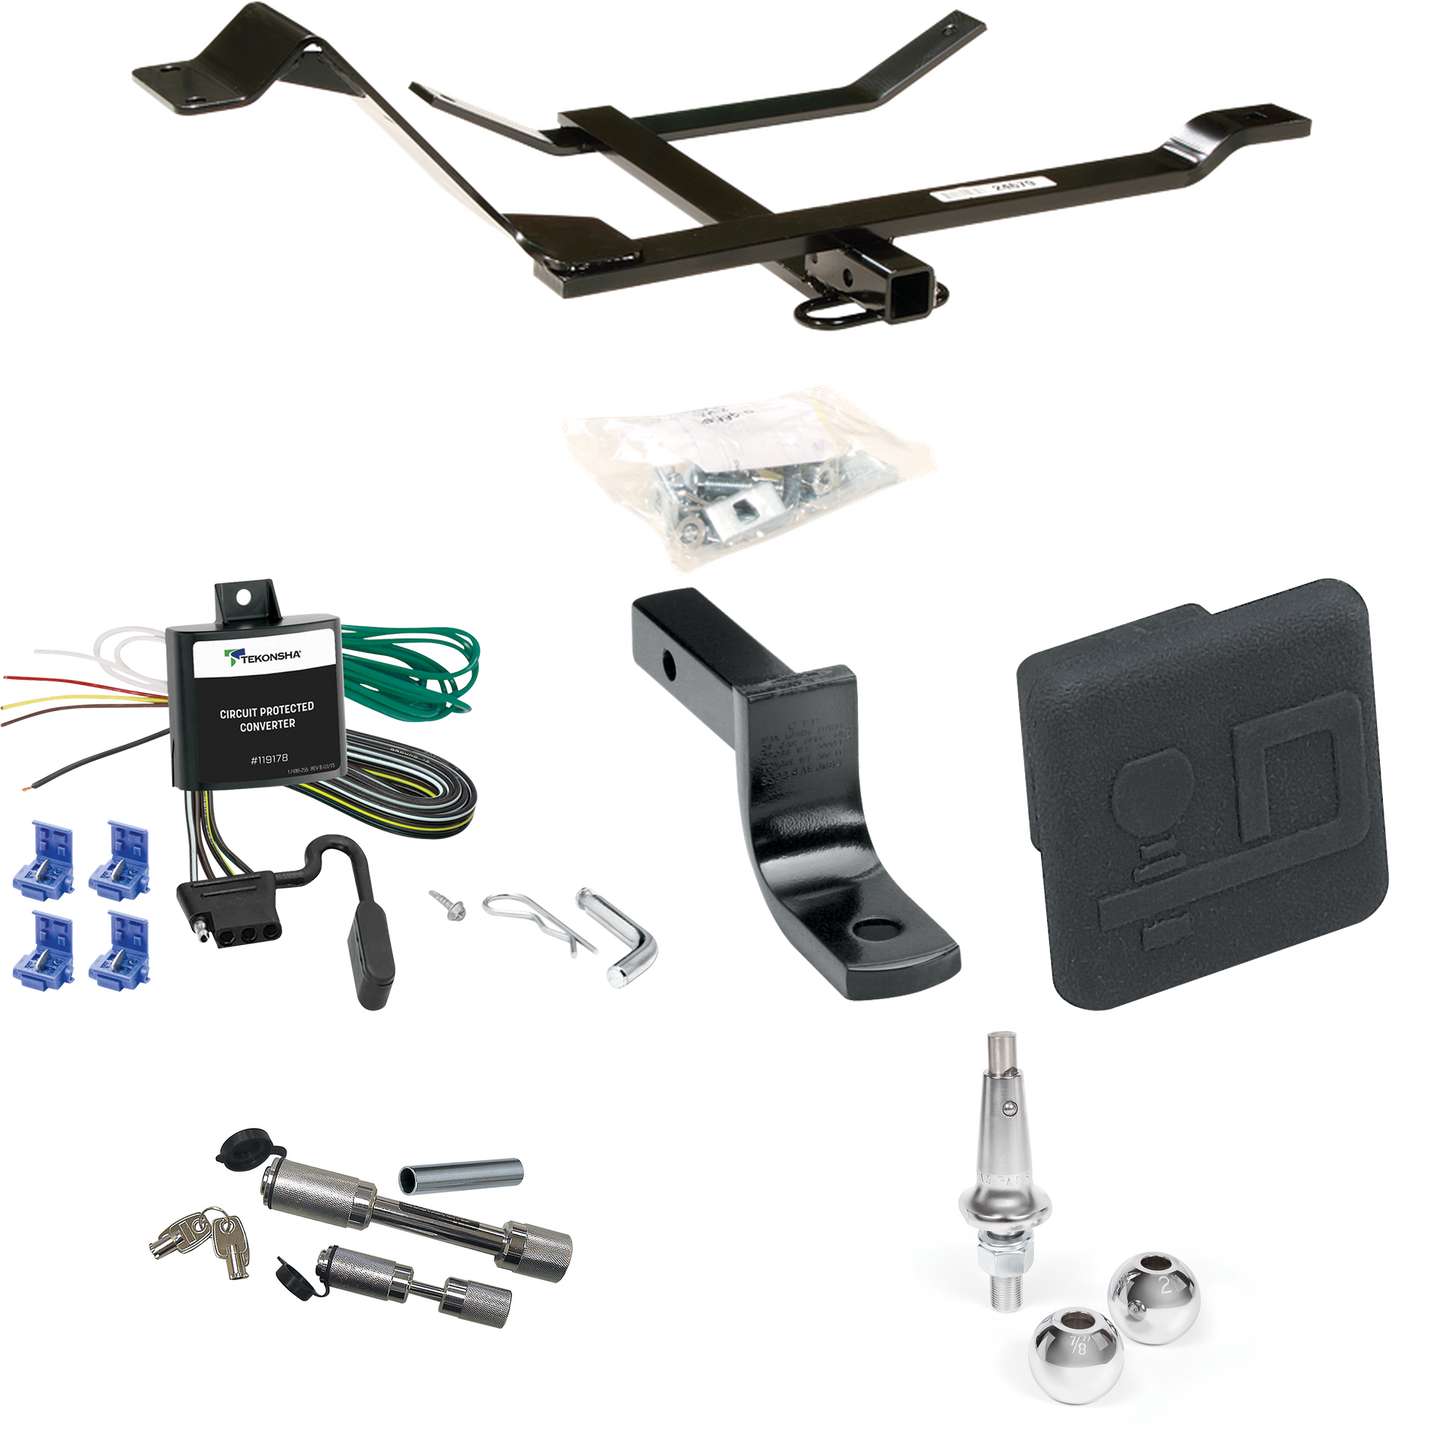 Fits 1998-2001 Volkswagen Beetle Trailer Hitch Tow PKG w/ 4-Flat Wiring Harness + Draw-Bar + Interchangeable 1-7/8" & 2" Balls + Hitch Cover + Dual Hitch & Coupler Locks By Draw-Tite